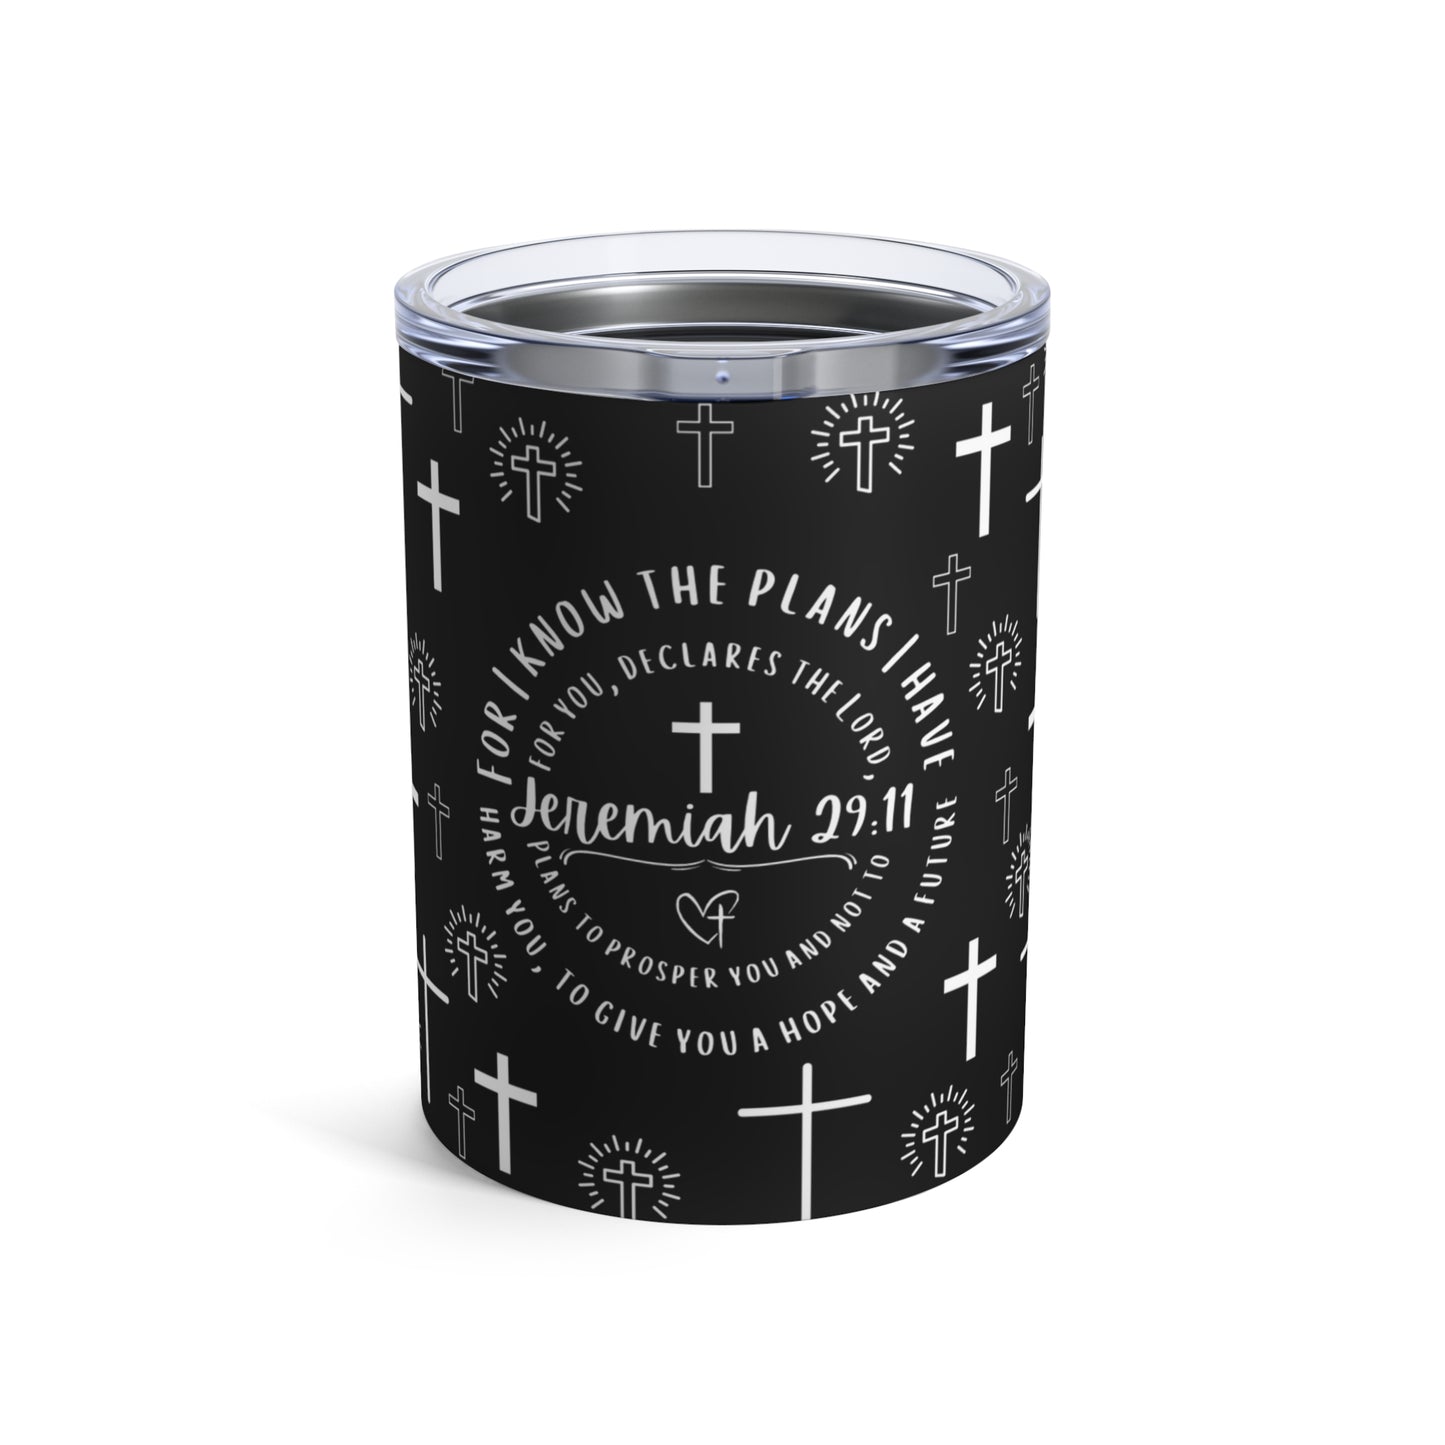 For I Know The Plans I Have For You Jeremiah 29:11 Christian Bible Verse Scripture 10oz Tumbler